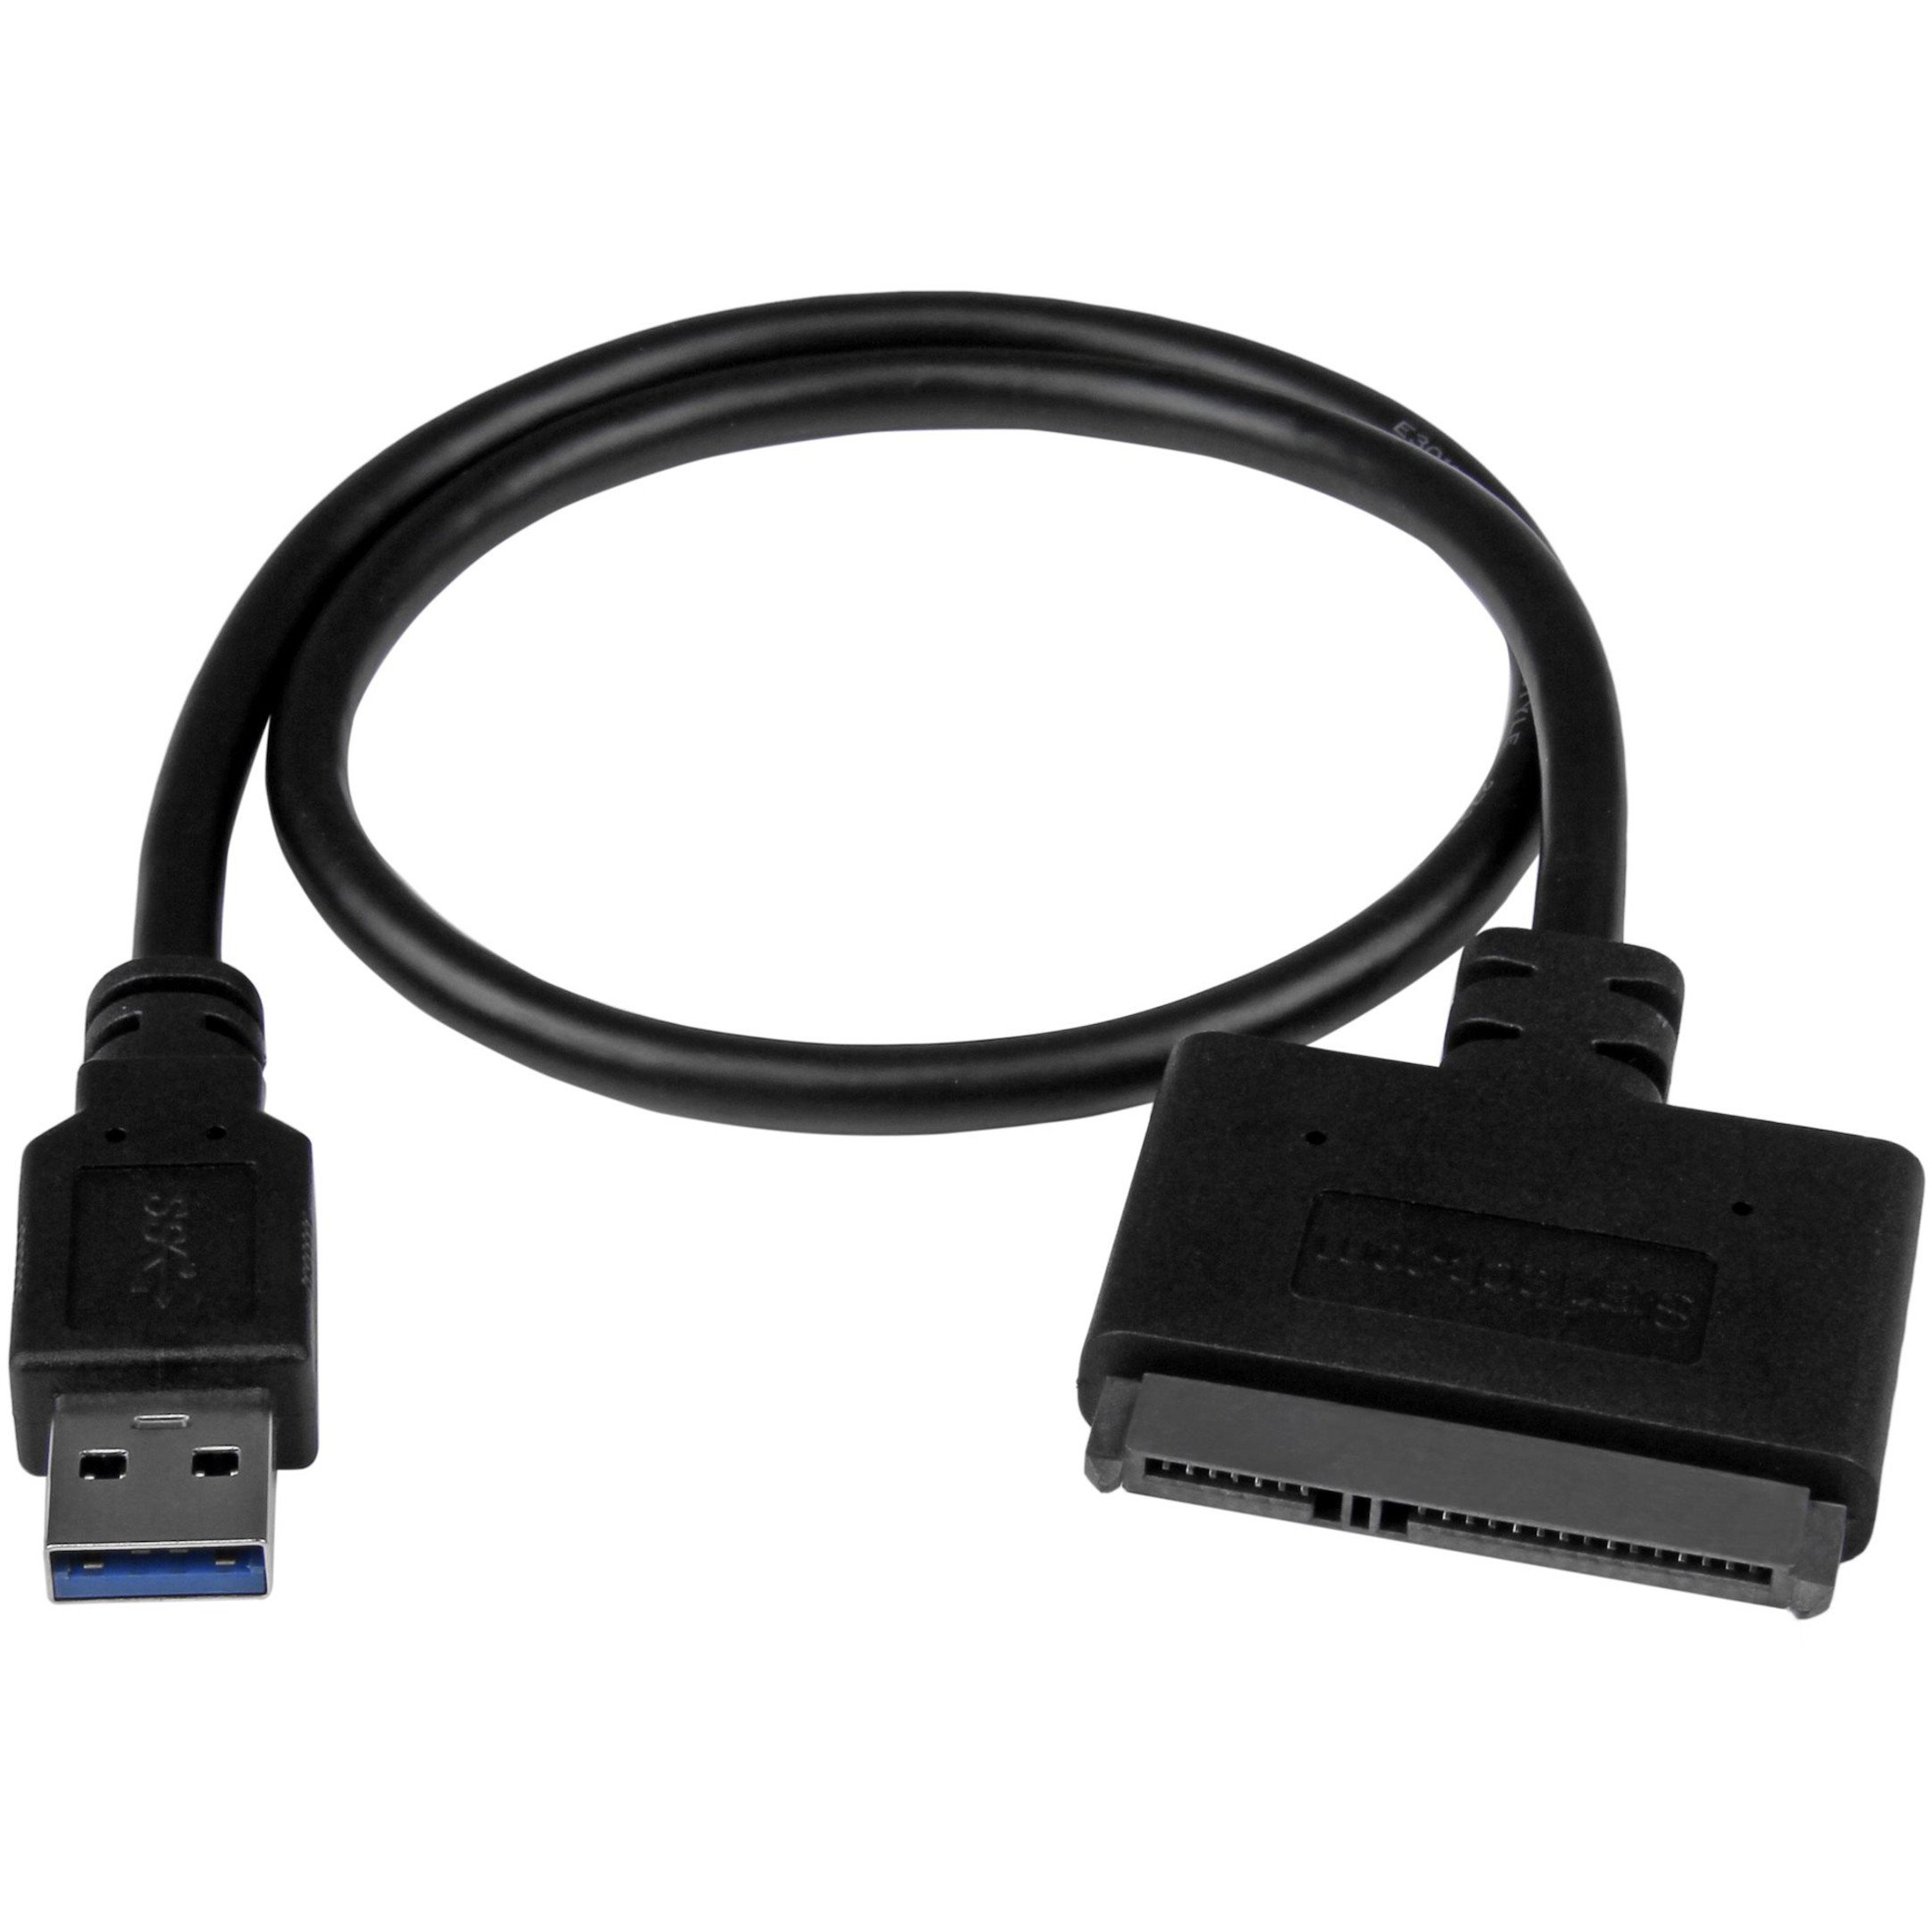 Startech .com USB 3.1 (10Gbps) Adapter Cable for 2.5" SATA SSD/HDD DrivesConnect a SATA SSD/HDD your computer using this USB 3.1... USB312SAT3CB - Corporate Armor